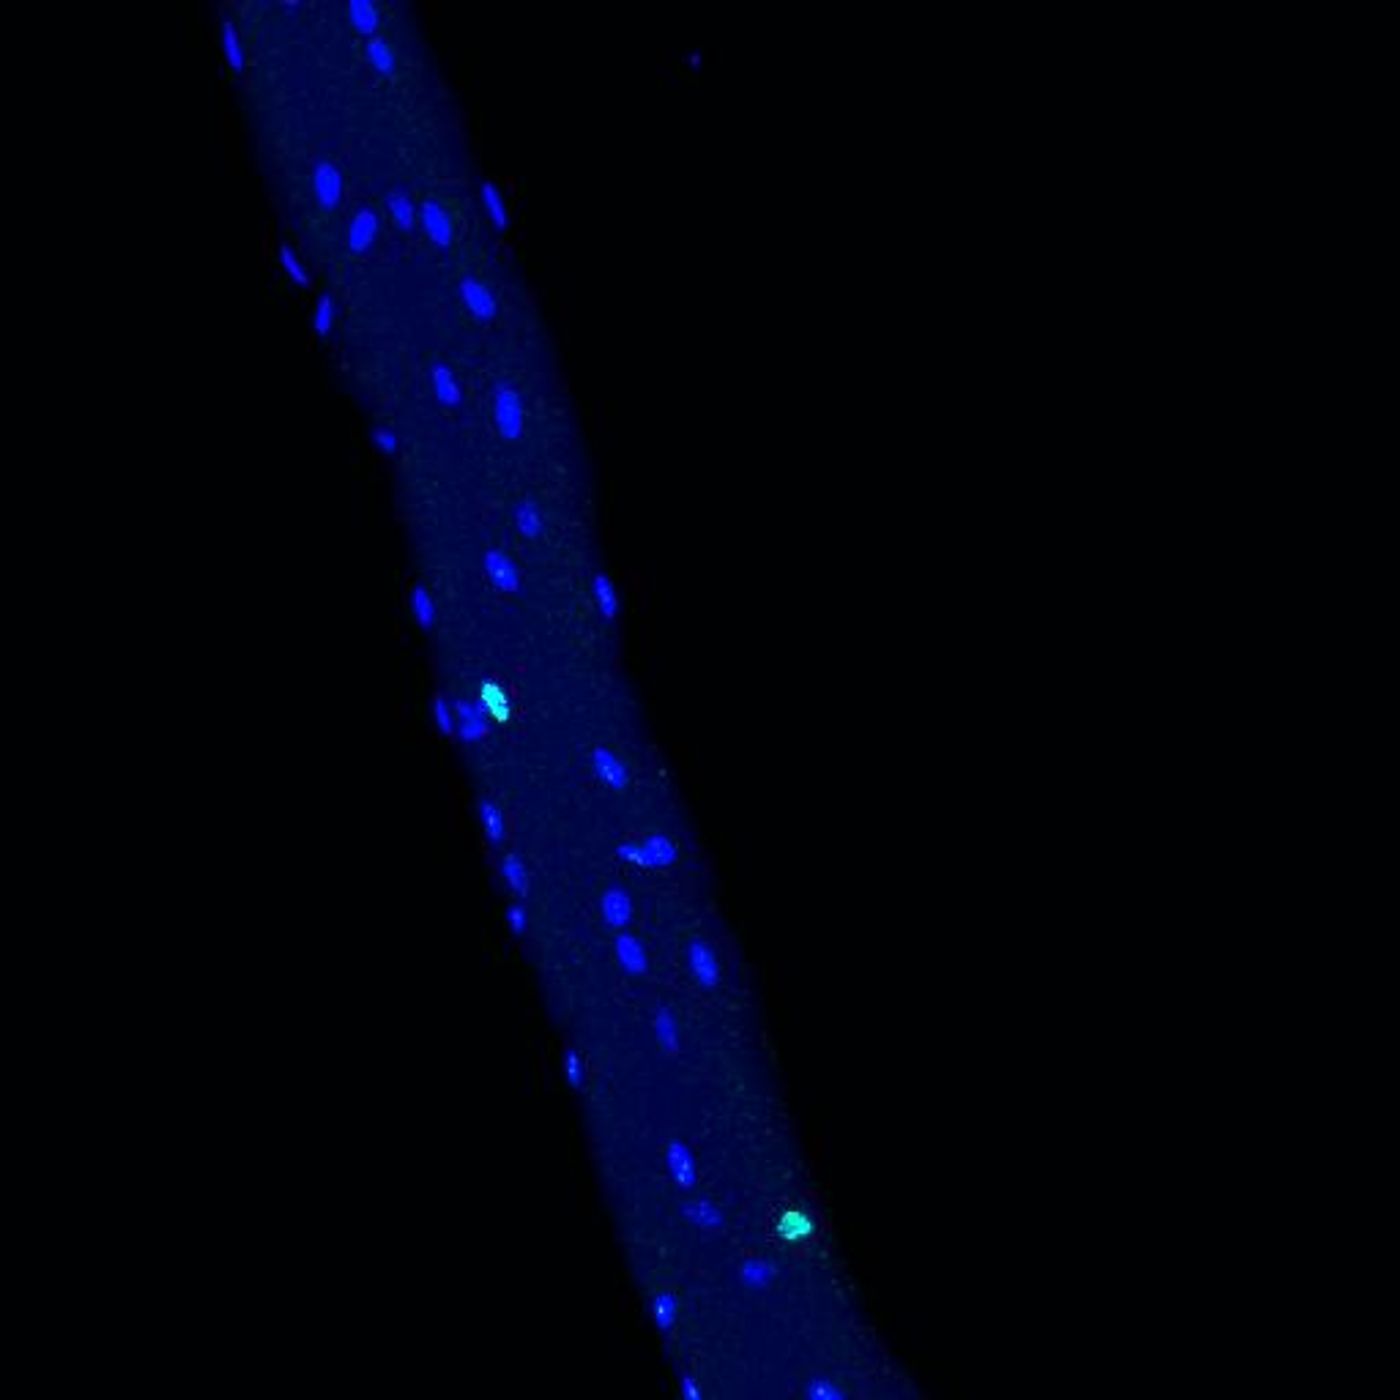 In this part of a muscle fiber, Rian was stained as well. Rian is a long, non-coding RNA (lncRNA) that is highly expressed in a cluster. This indicates that the nuclei have a function in metabolism of the cell. / Credit  C.Birchmeier Lab, MDC